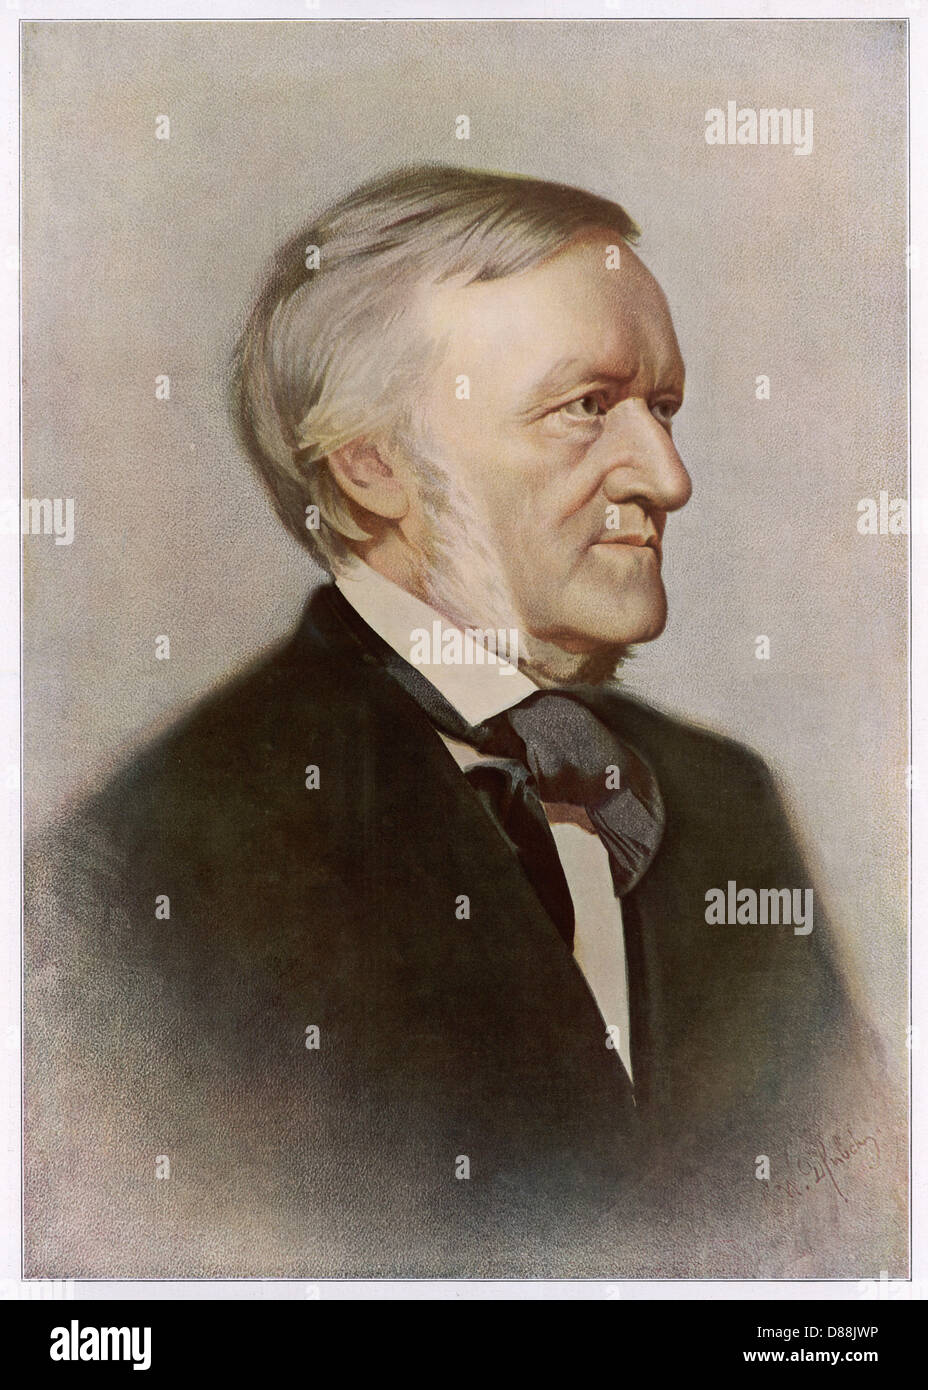 Richard Wagner - German Composer, theatre director and condu Stock Photo